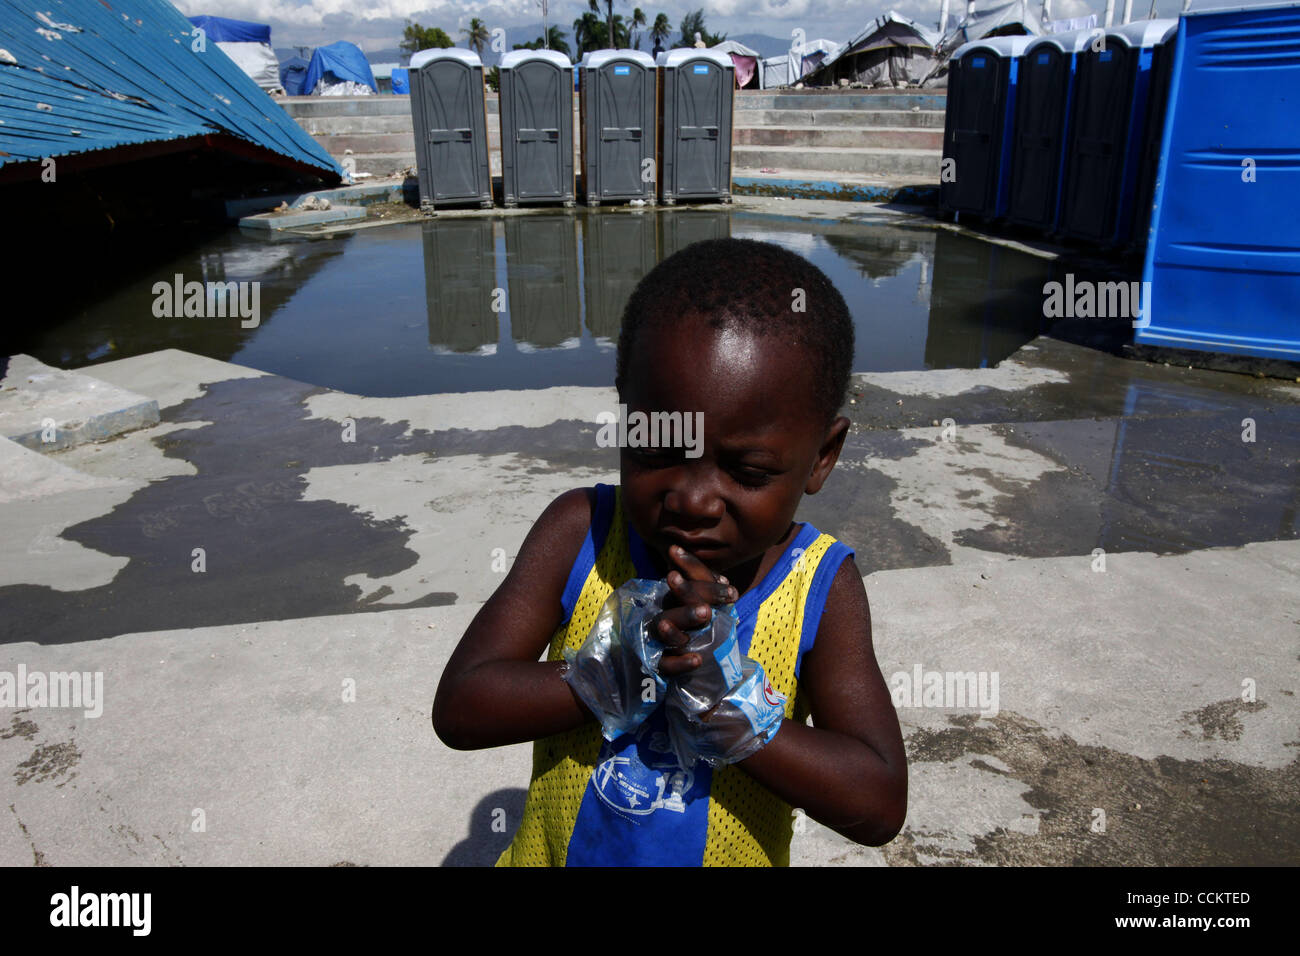 Nov 10, 2010 - Port-au-Prince, Haiti.A young residents of a tent city in the Cite Soleil area of Port-au-Prince, Haiti wears water bags as gloves in an effort, his older sisiter said, to avoid getting cholera, as other residents gather water from pipes just yards from portable toilets and flood wate Stock Photo